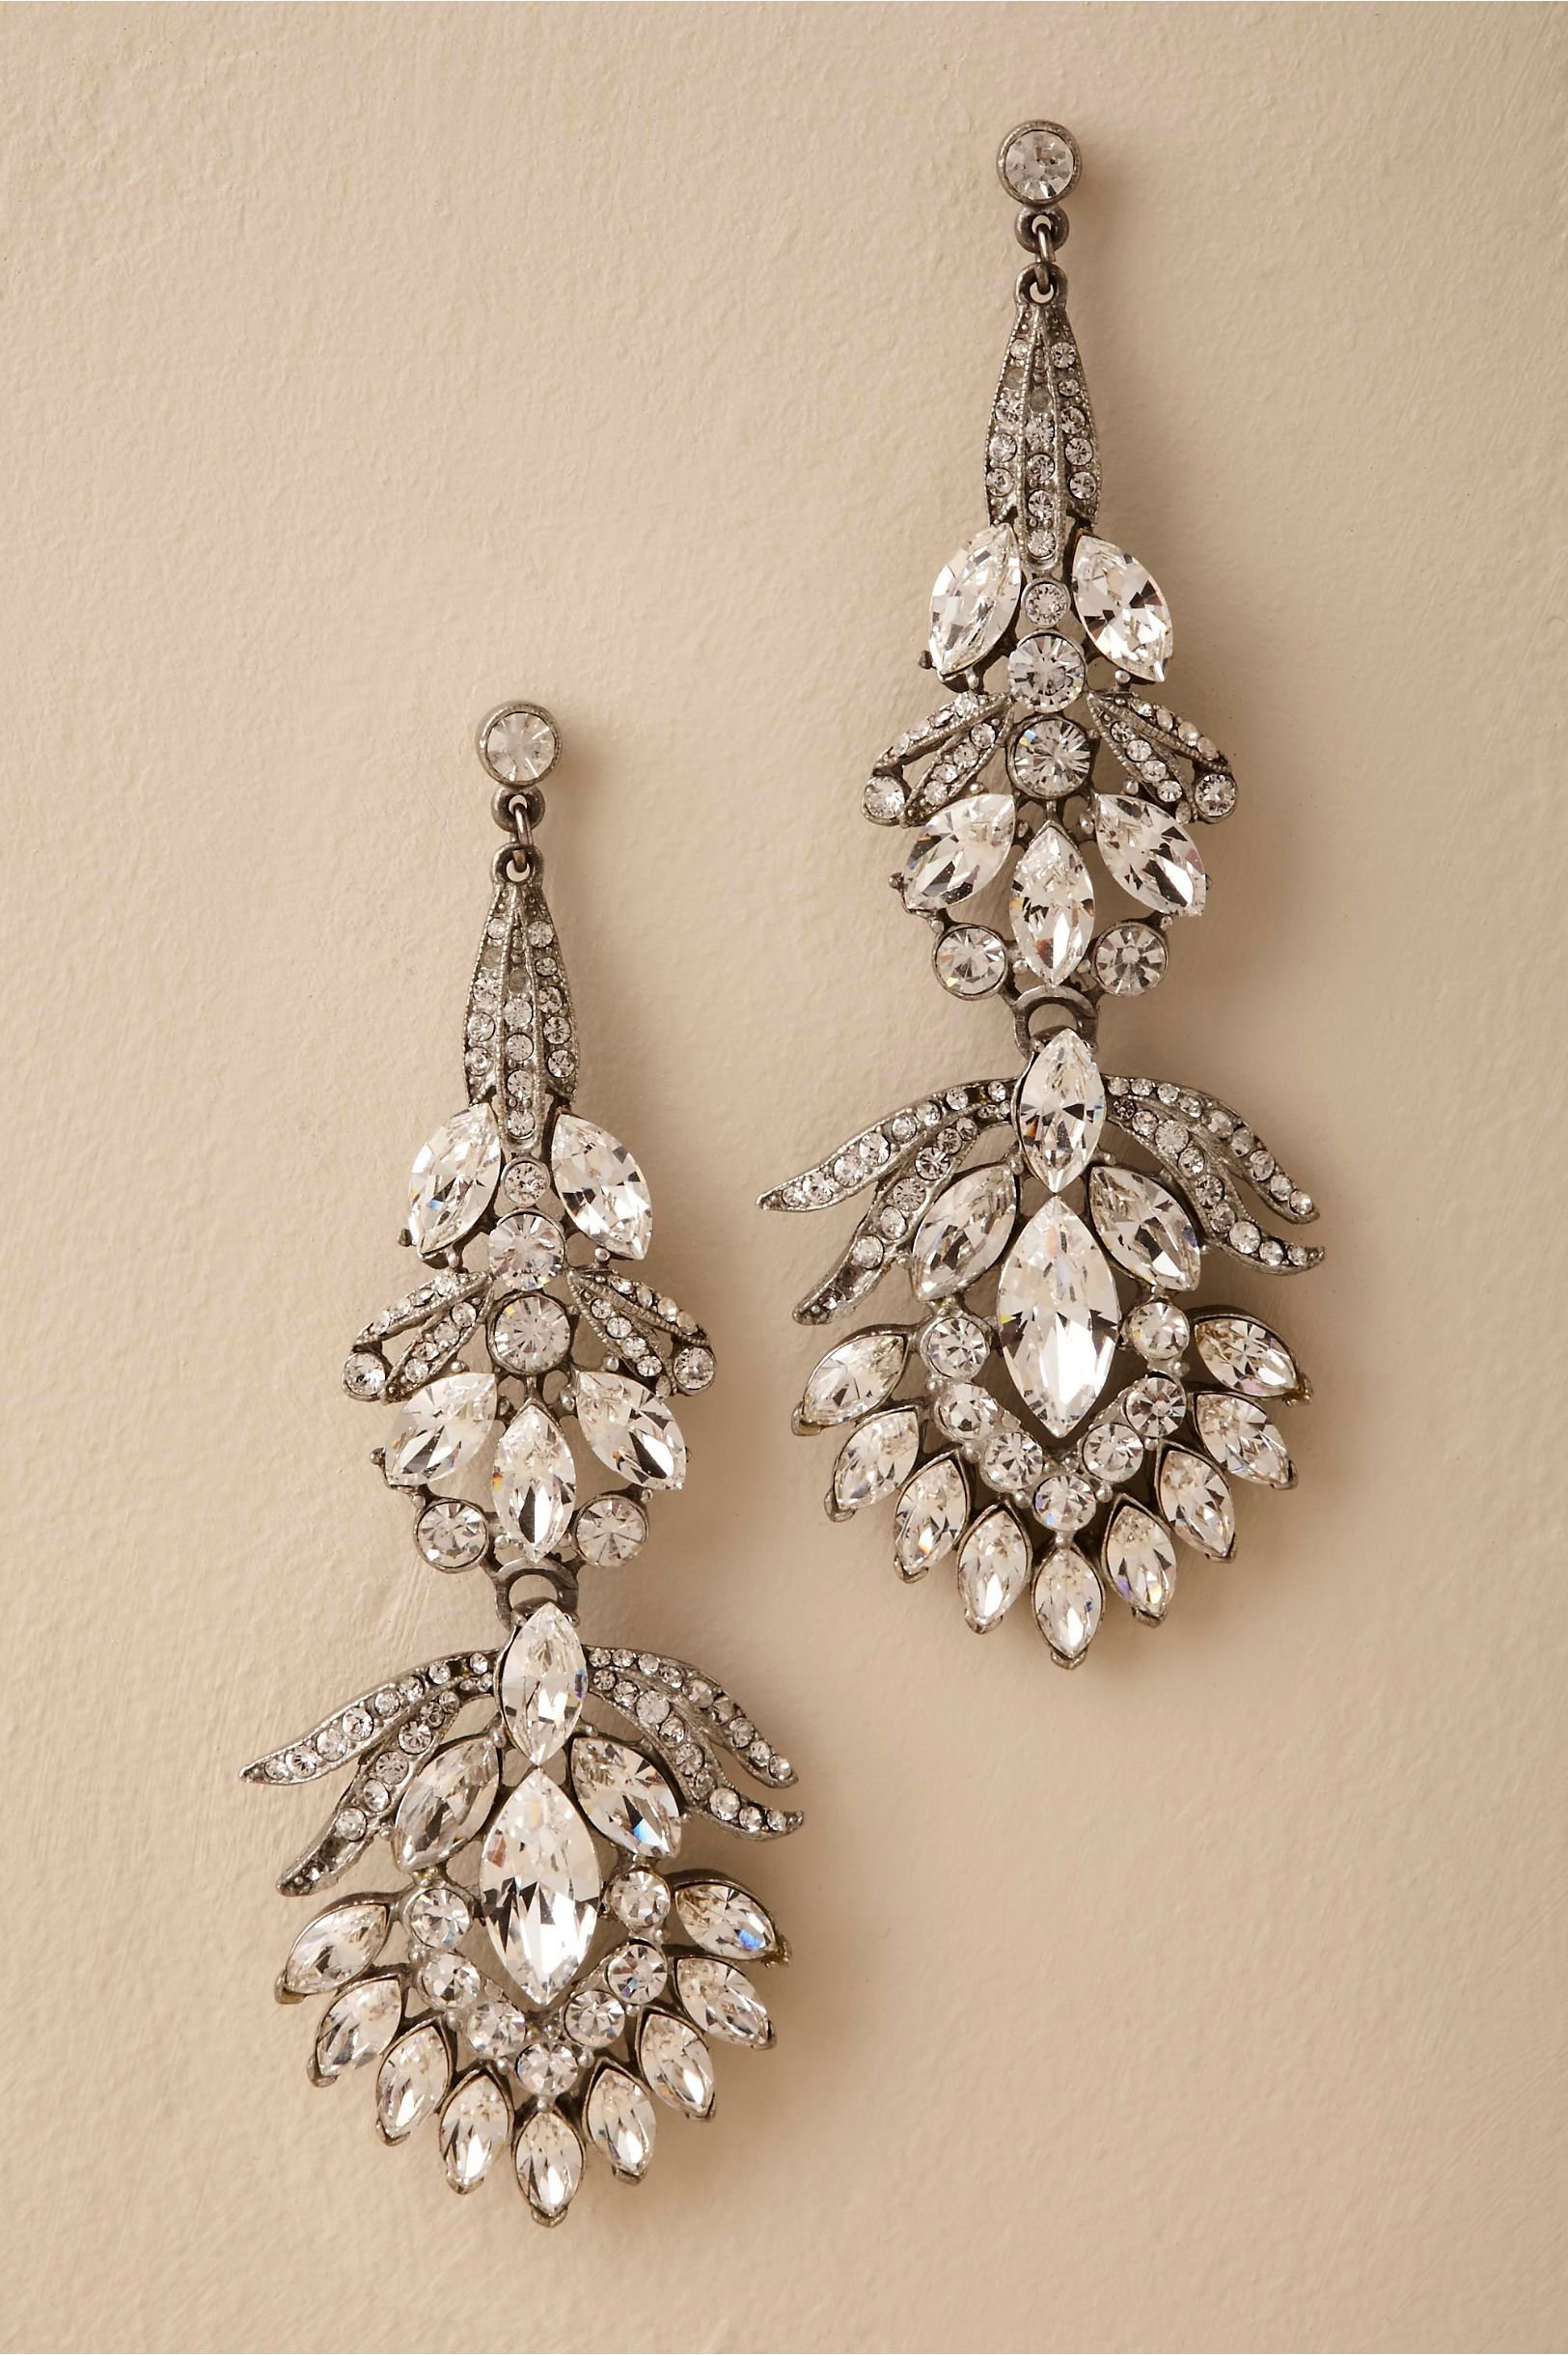 8 Different Types Of Earrings Every Woman Should Have In Her Jewellery Box